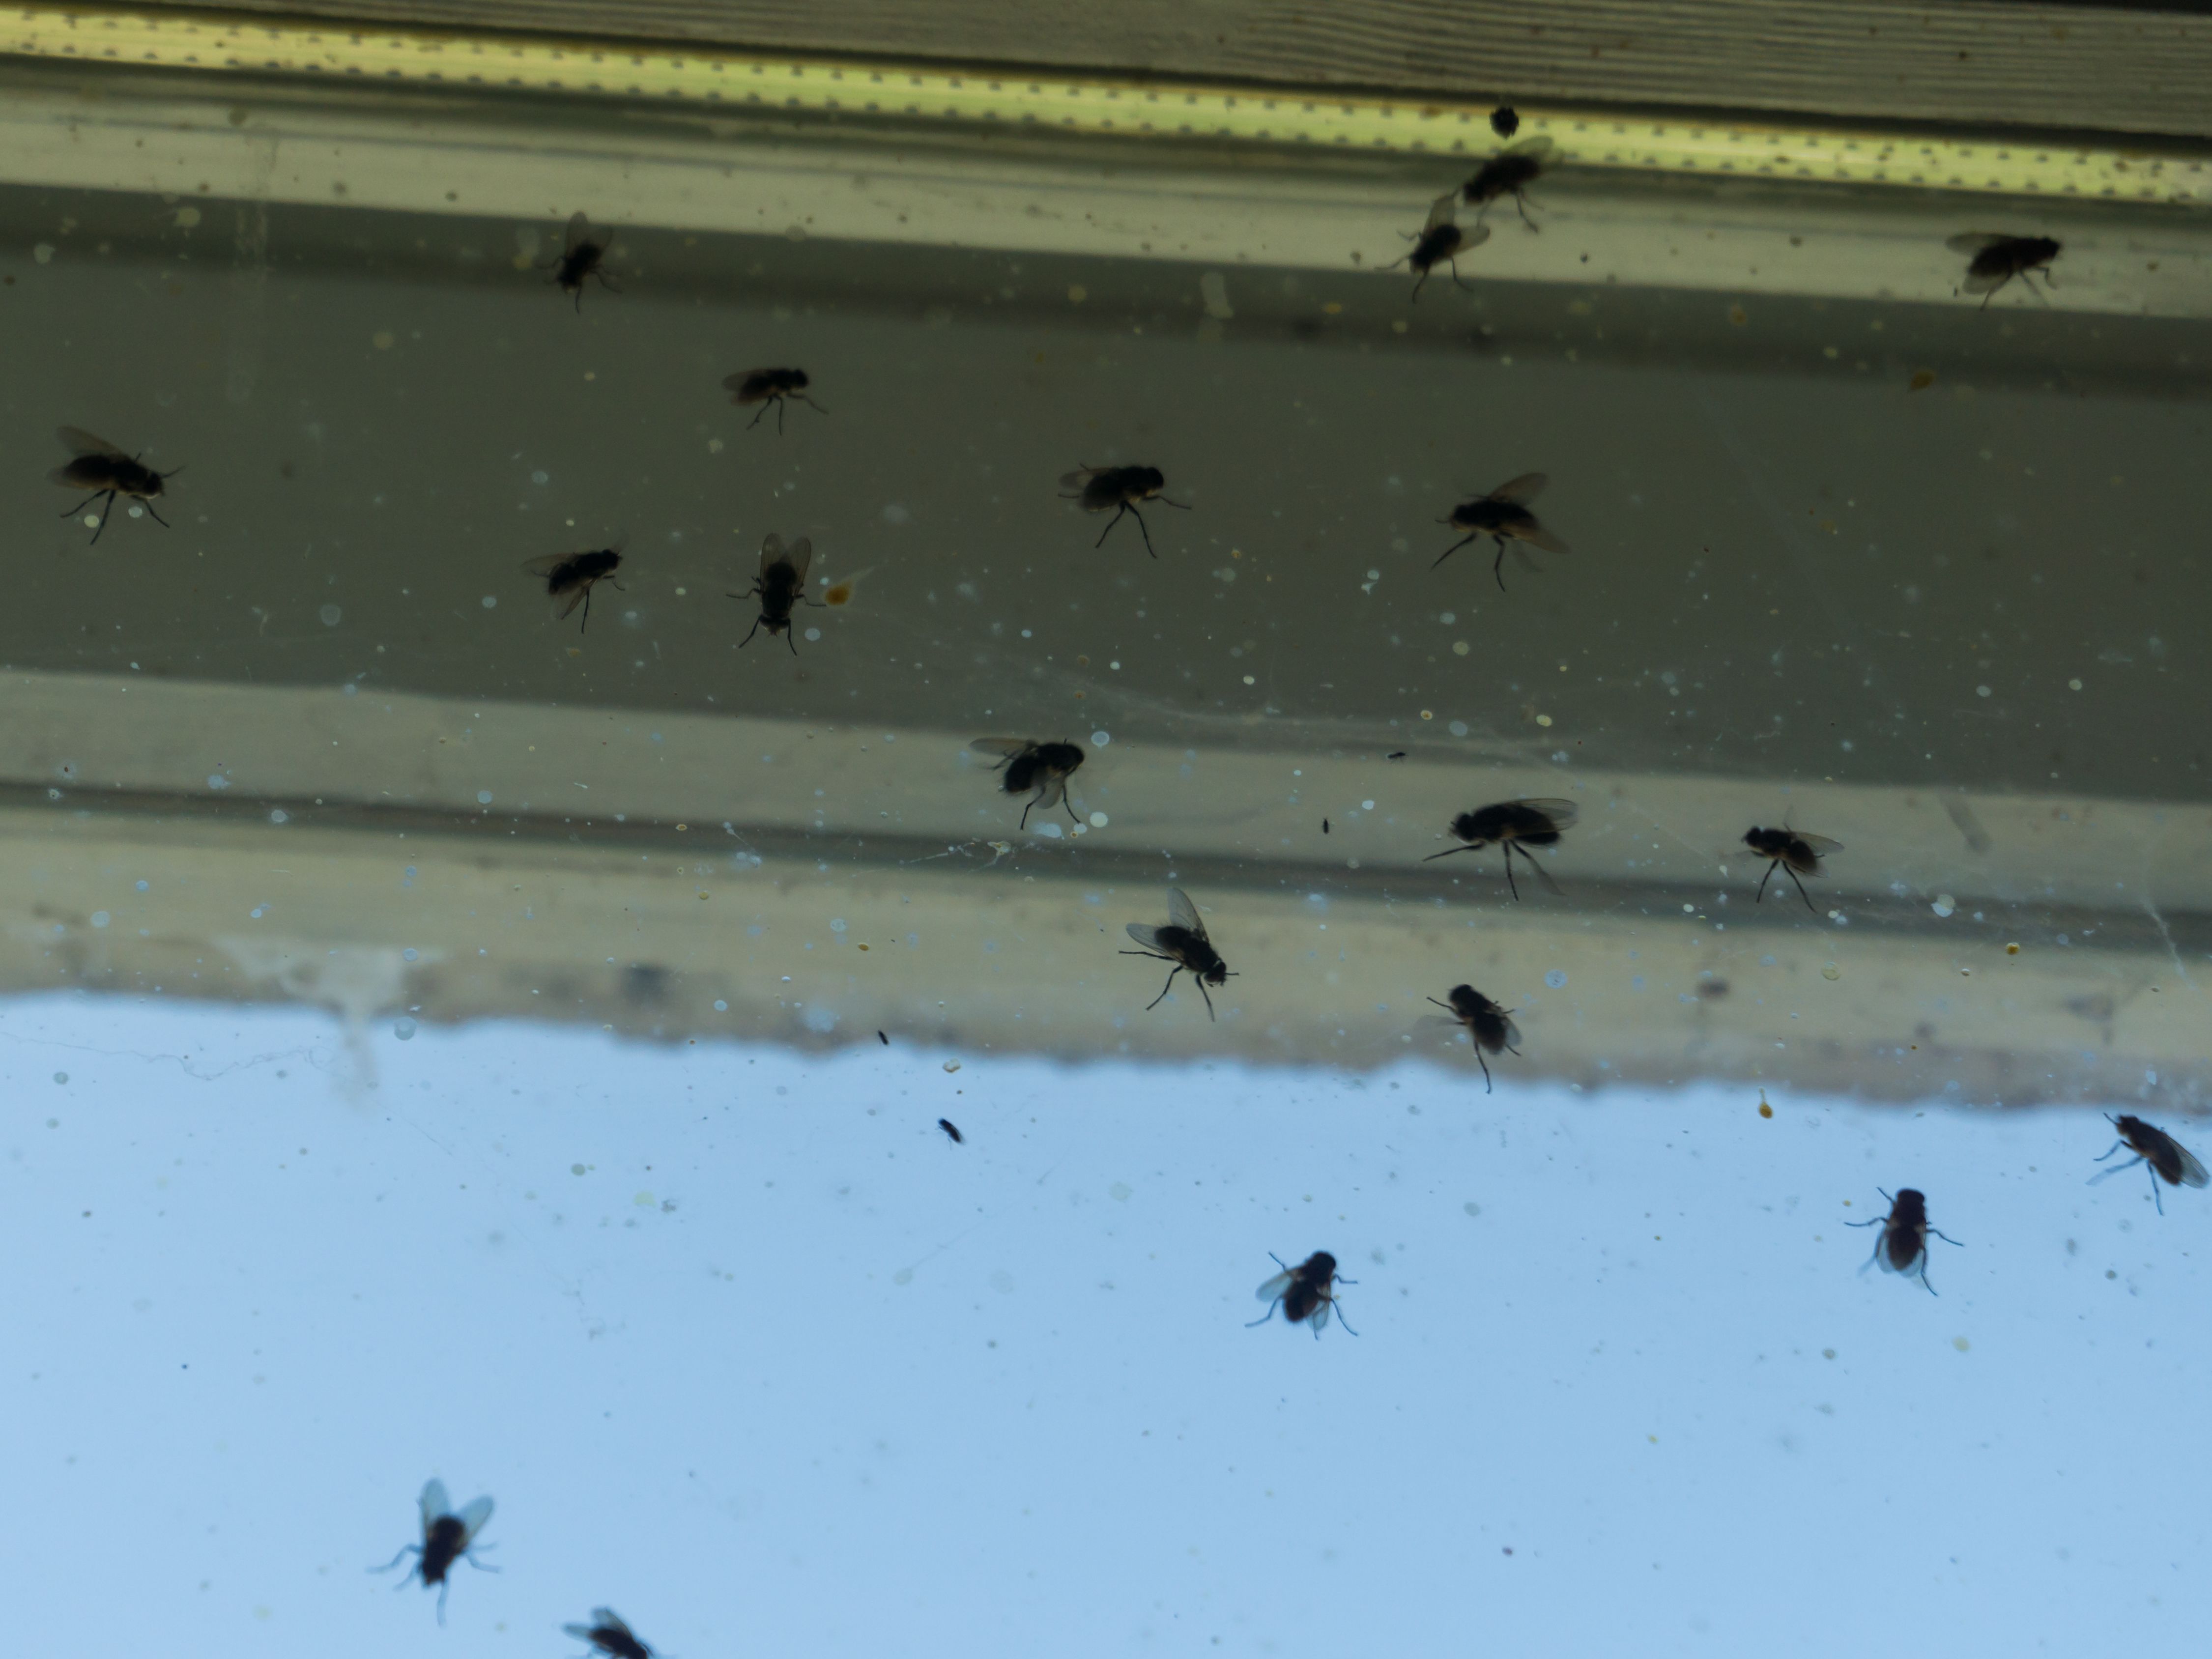 How To Get Rid Of Flies Inside And, How To Get Rid Of Kitchen Flying Bugs